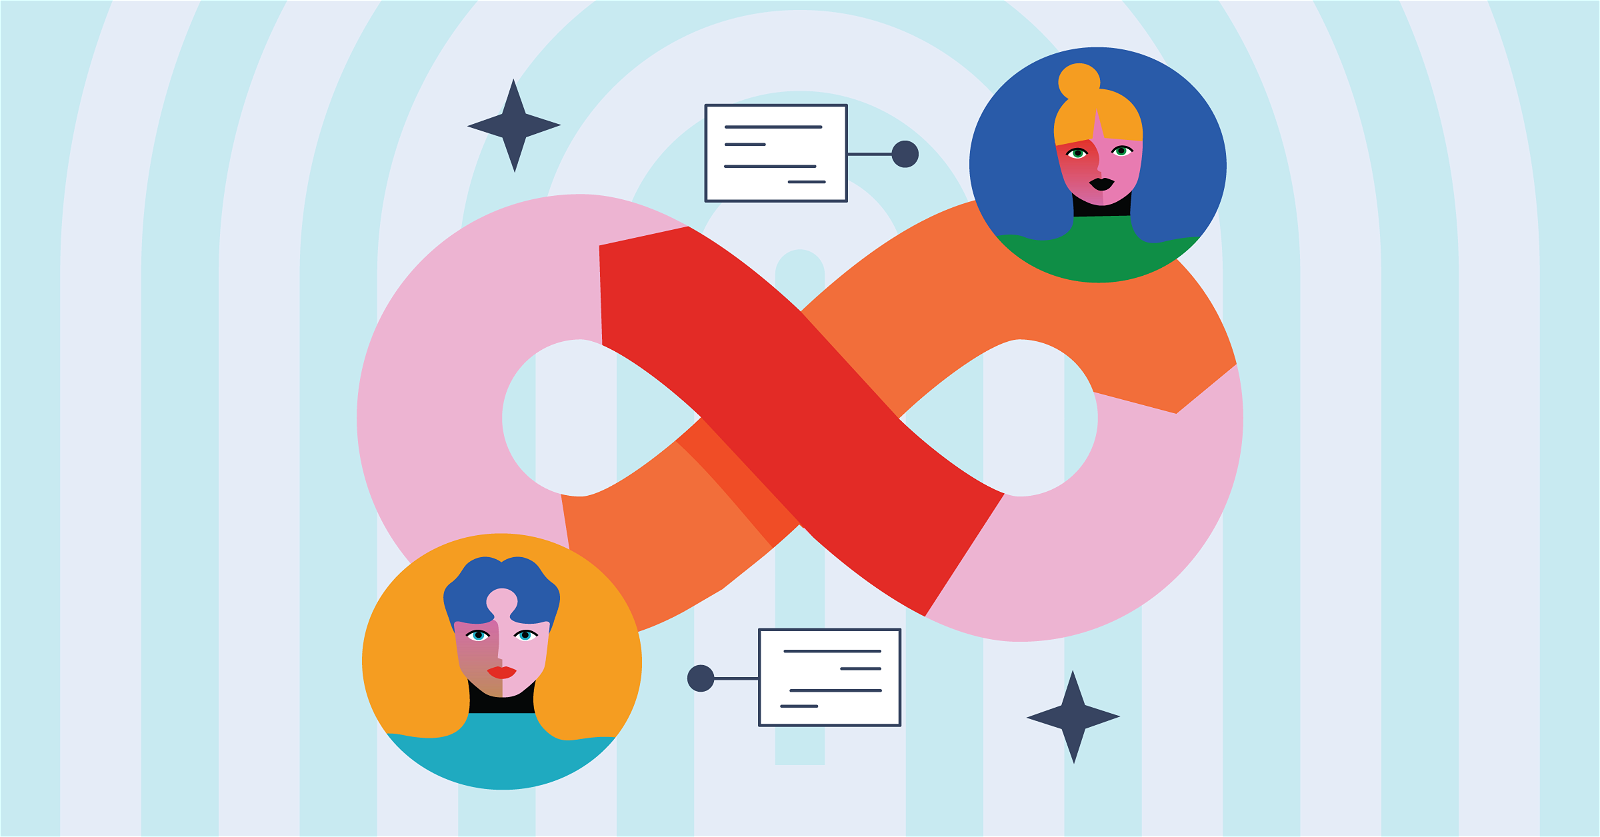 Illustration of an infinity loop with two speech bubbles and two stylized female faces on opposite sides, each connected to a speech bubble. Two stars lie near each face against a blue striped background, symbolizing the constant communication essential for improving employee retention rates.